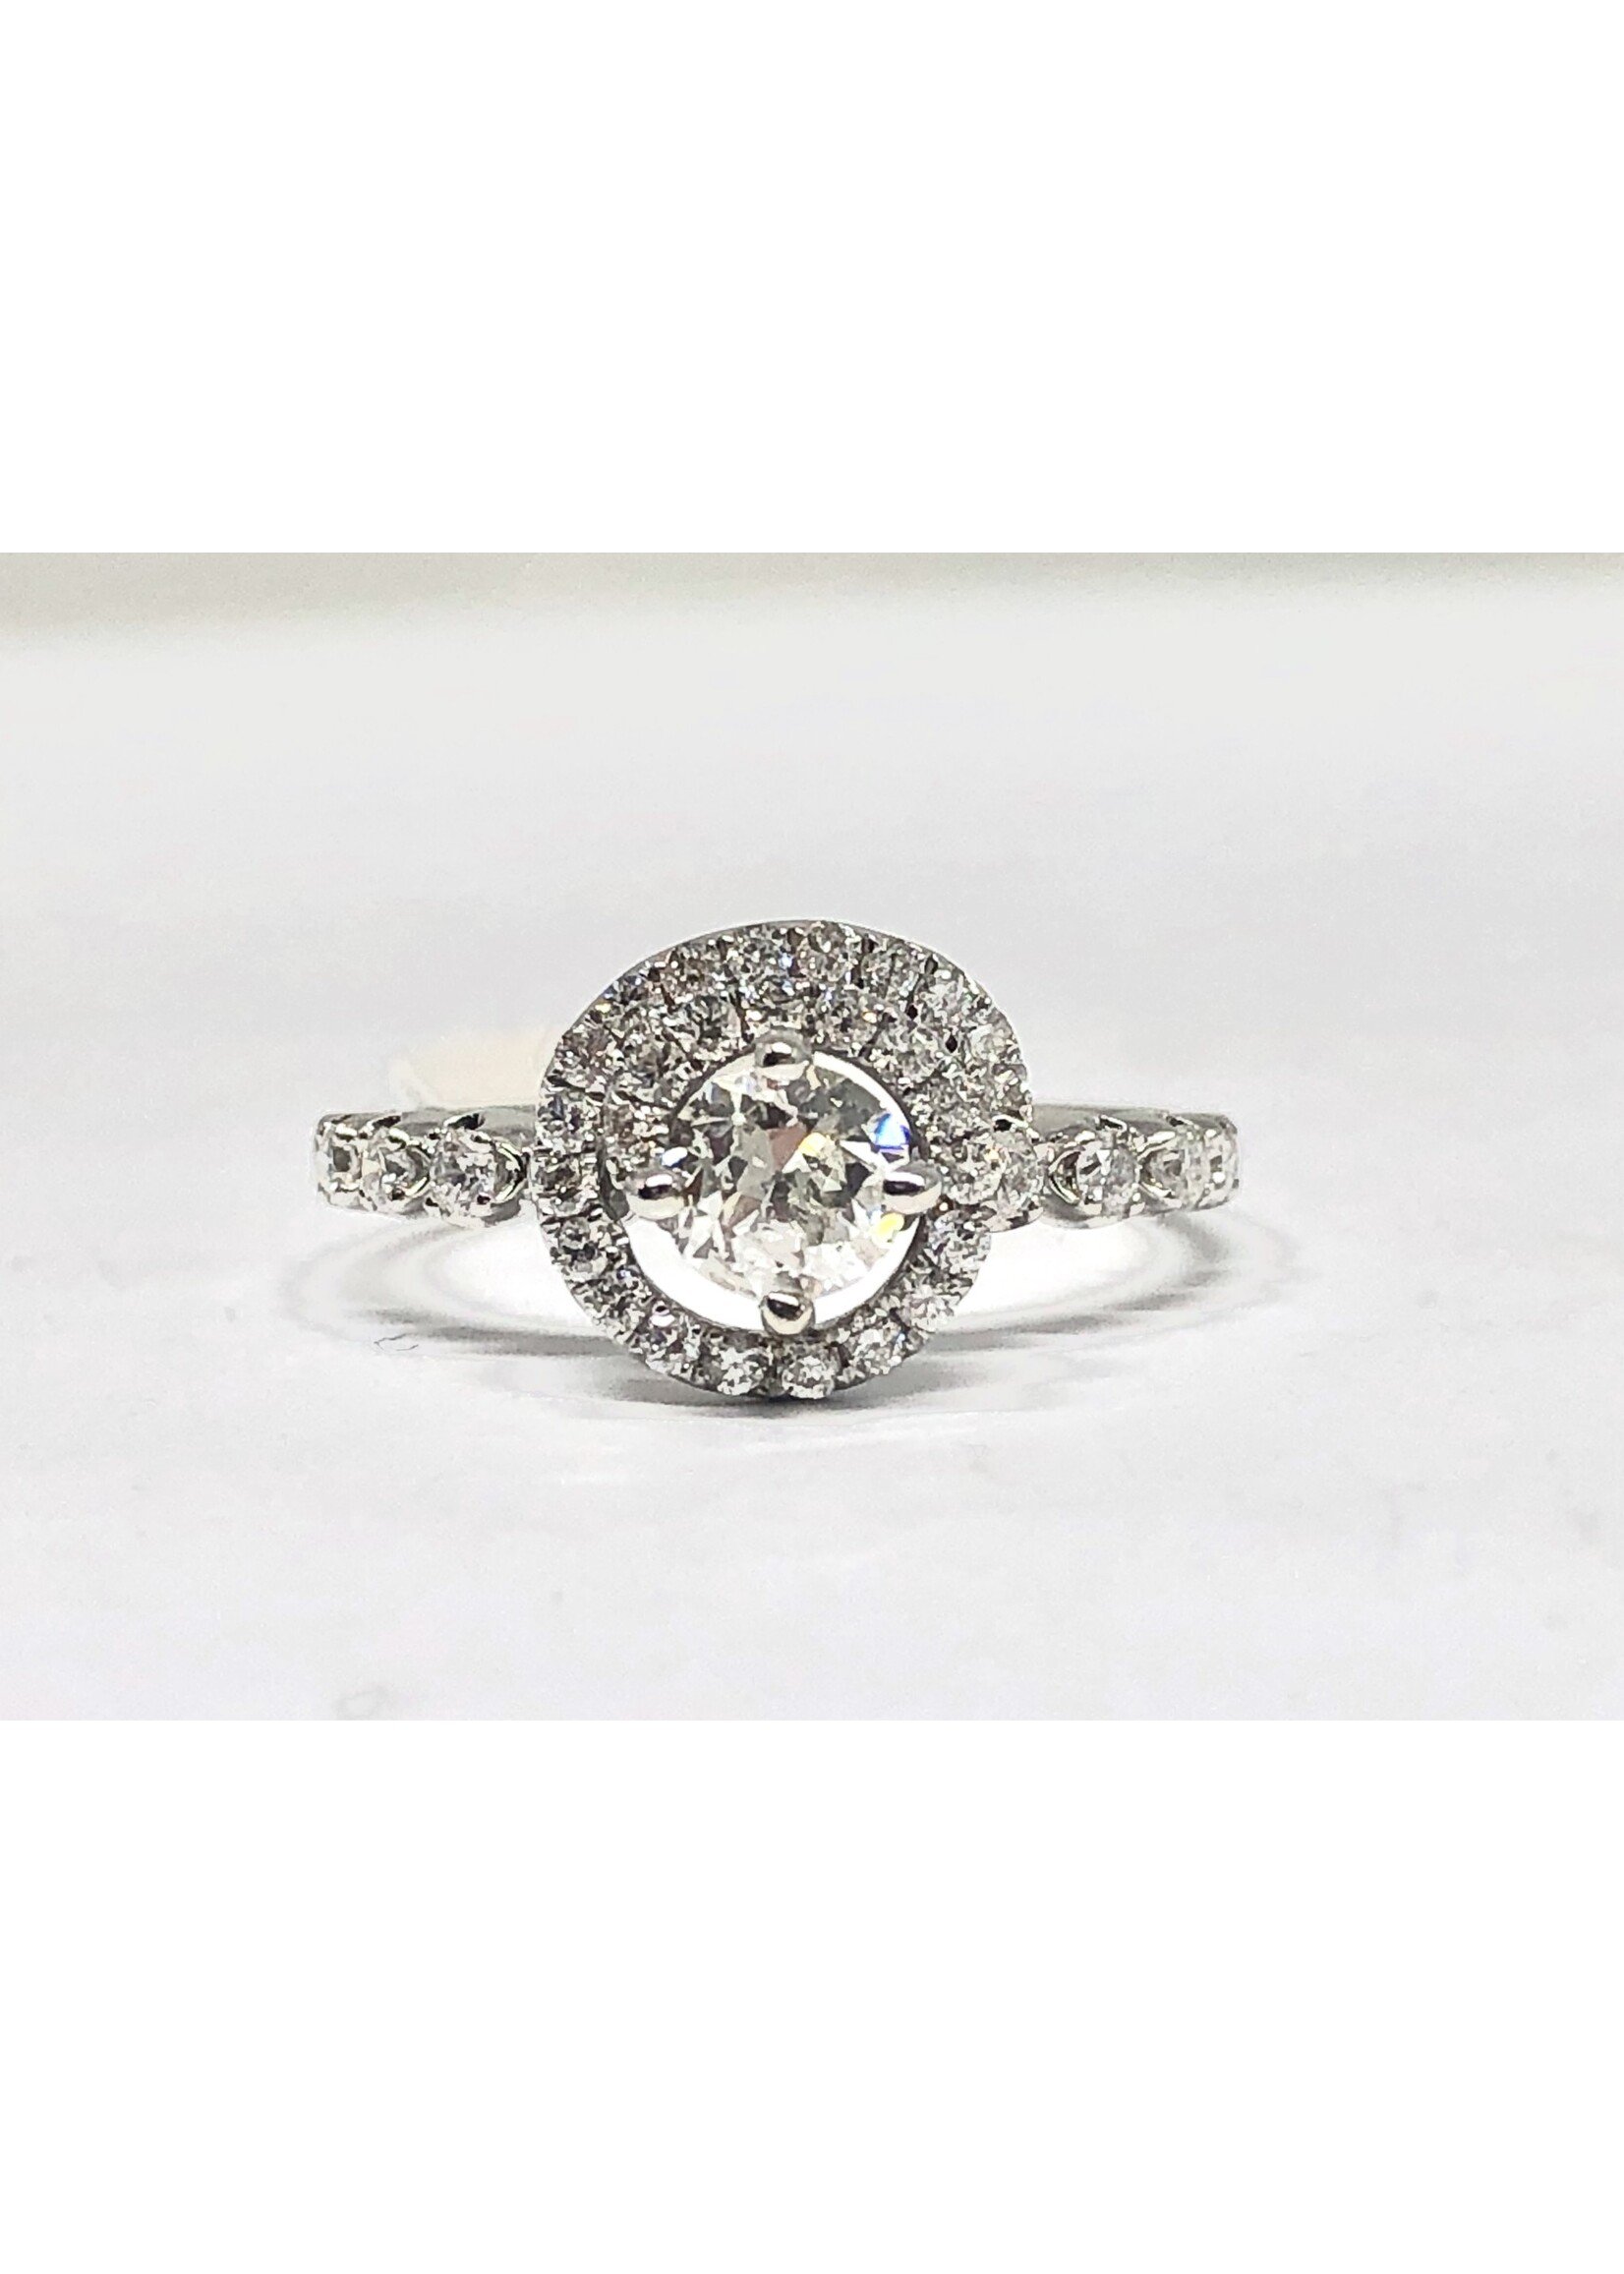 14KW 3.1g 1.00ctw (.50ctr) I/SI2 Old Mine Cut Diamond Spiral Halo Engagement Ring (size 7)